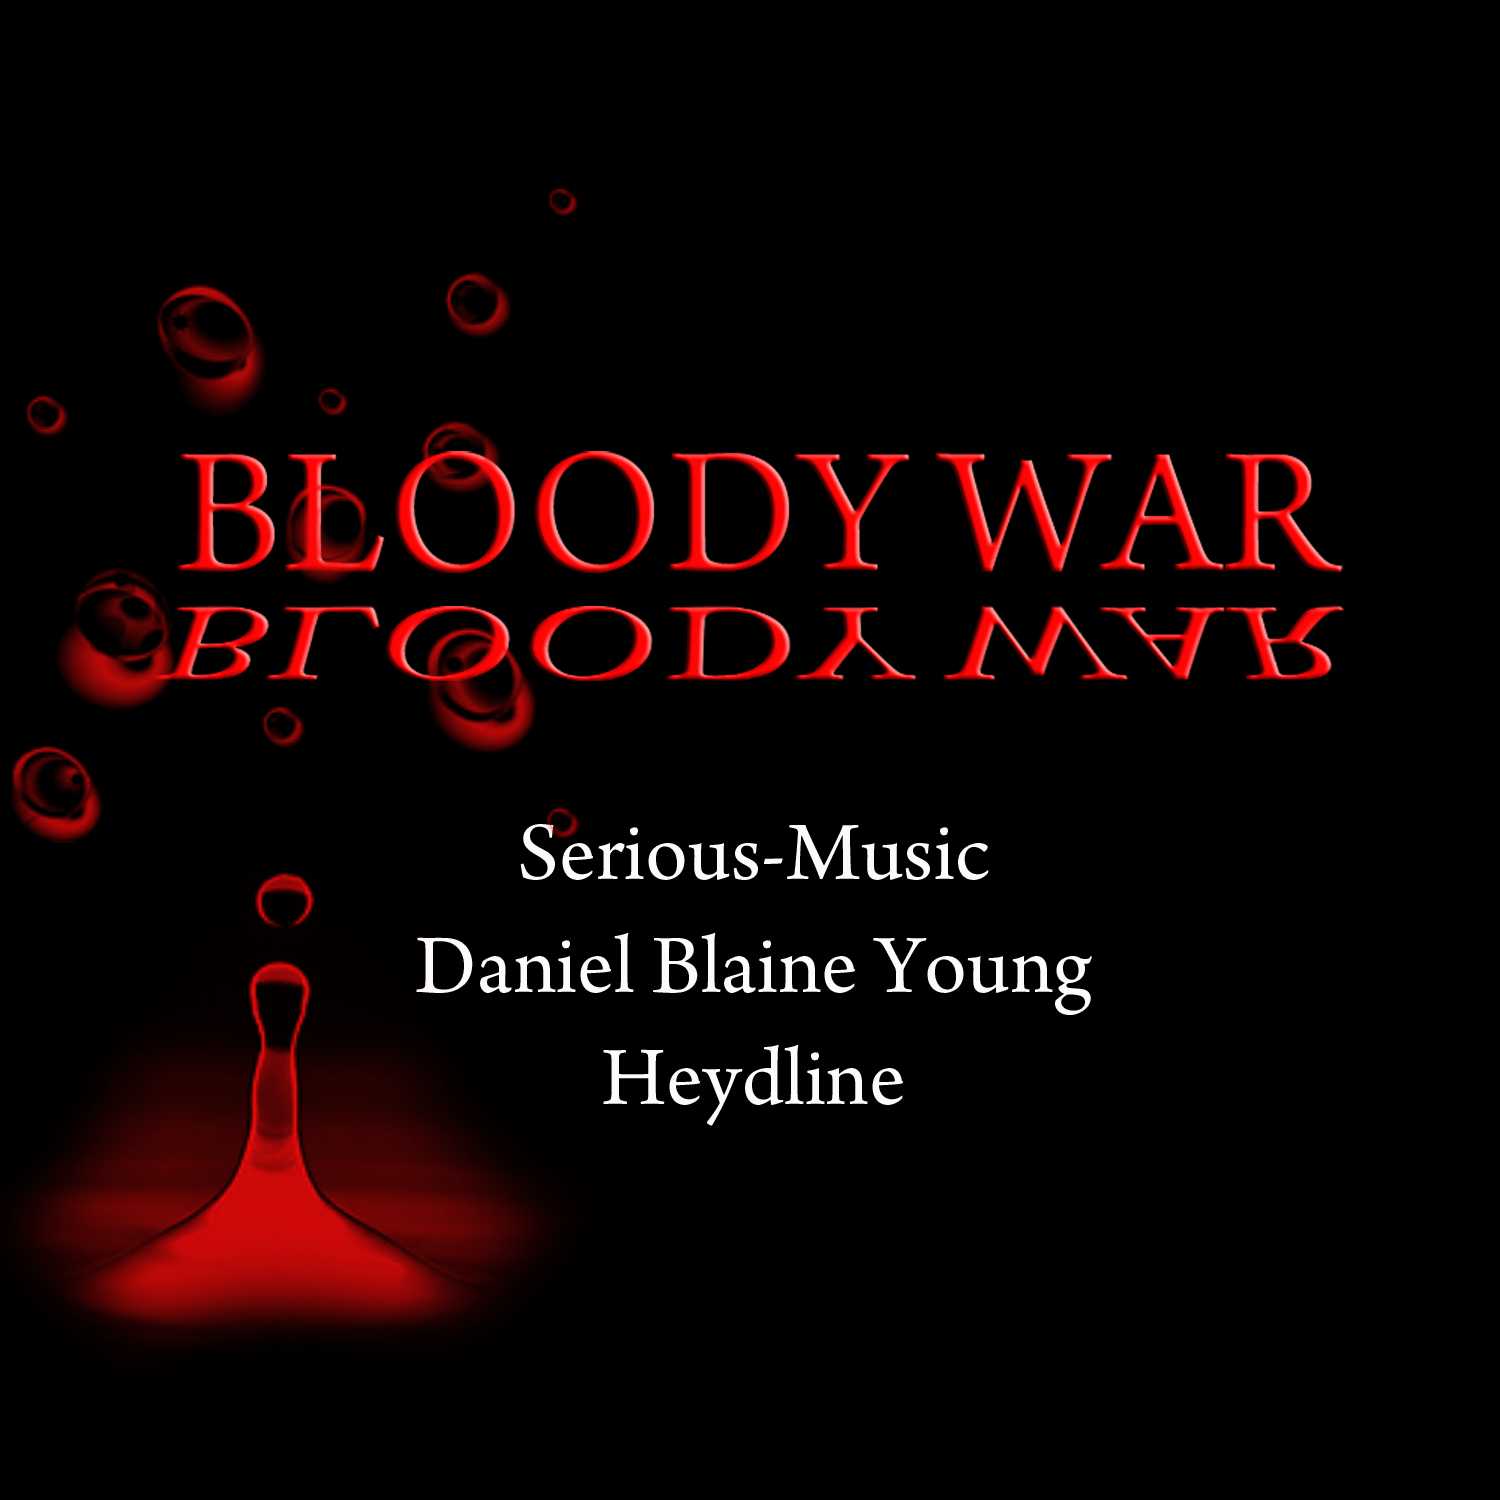 Bloody War feat. Danlb Young, Heydline - Album WAR IS NOT THE ANSWER